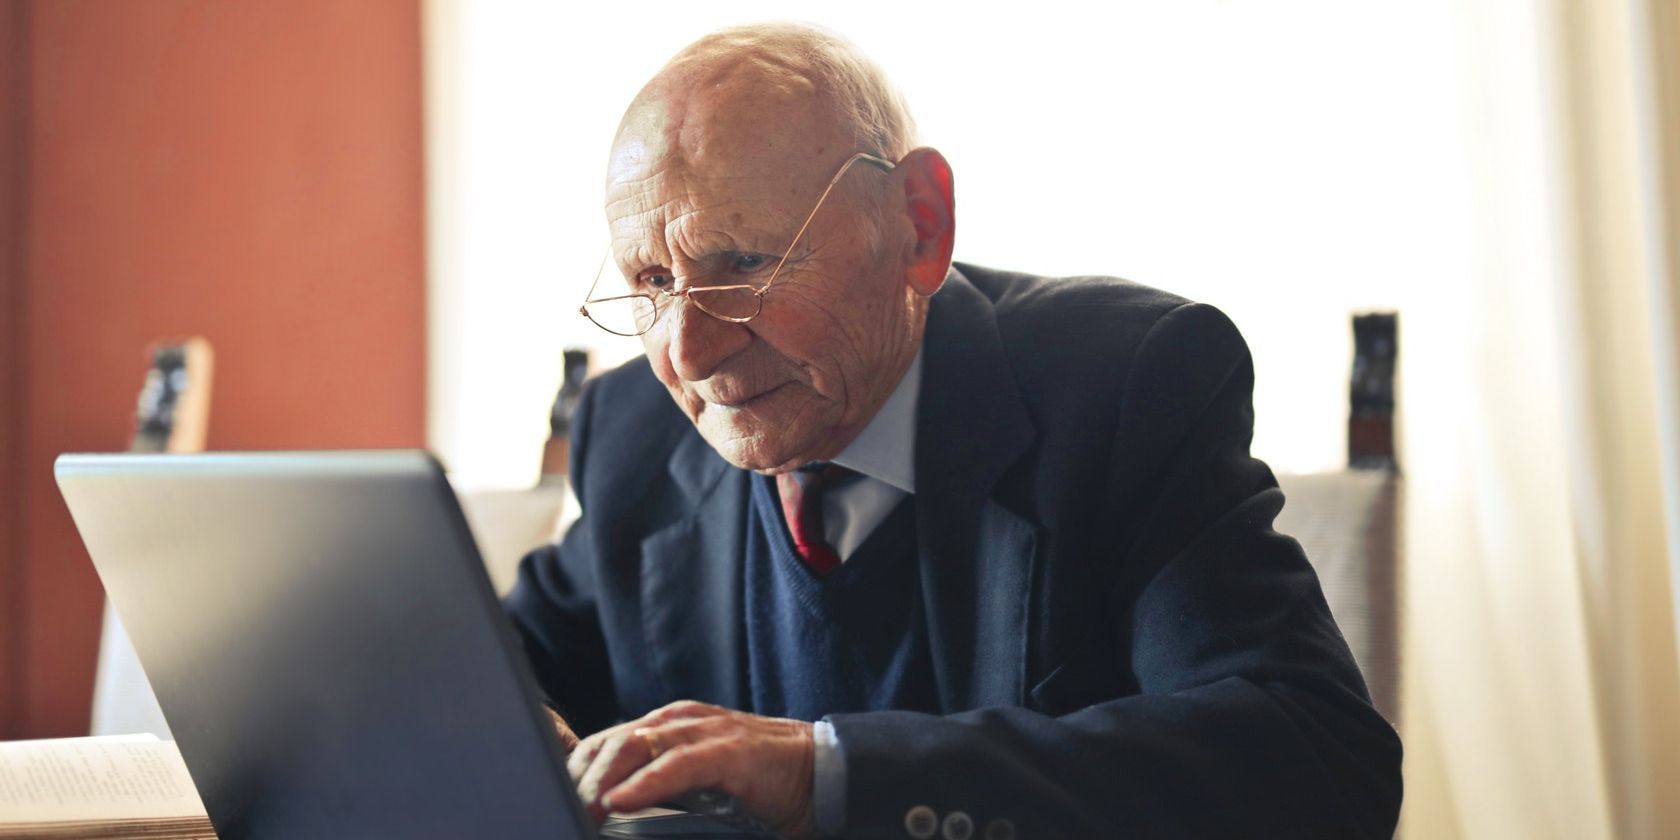 serious senior man in formal suit working on laptop at workplace